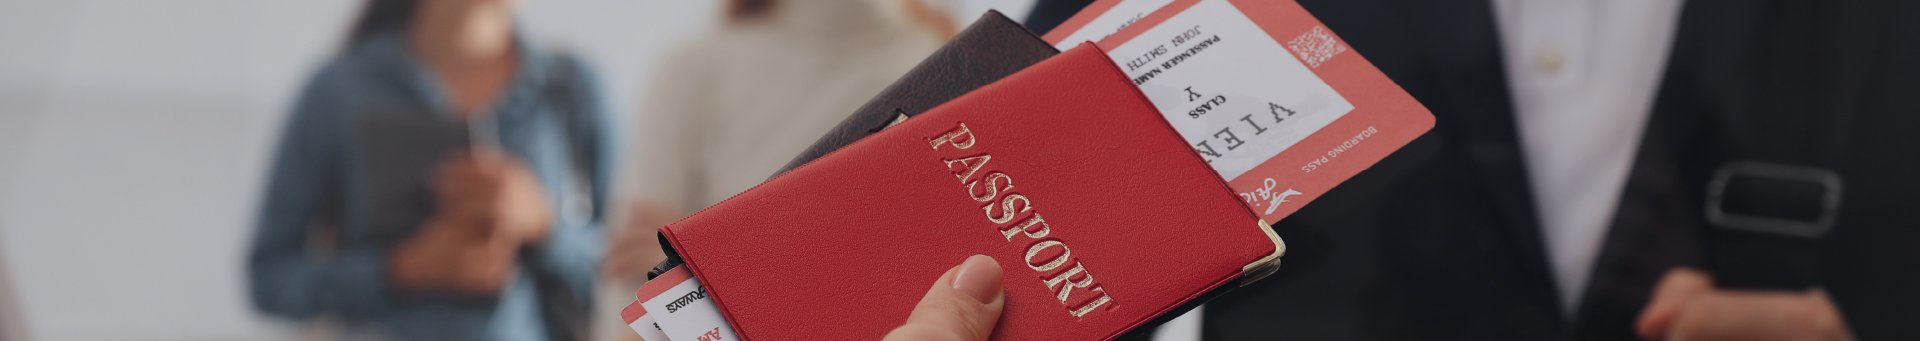 Find out if you need an Electronic Travel Authorization (eTA) to travel to Canada.
